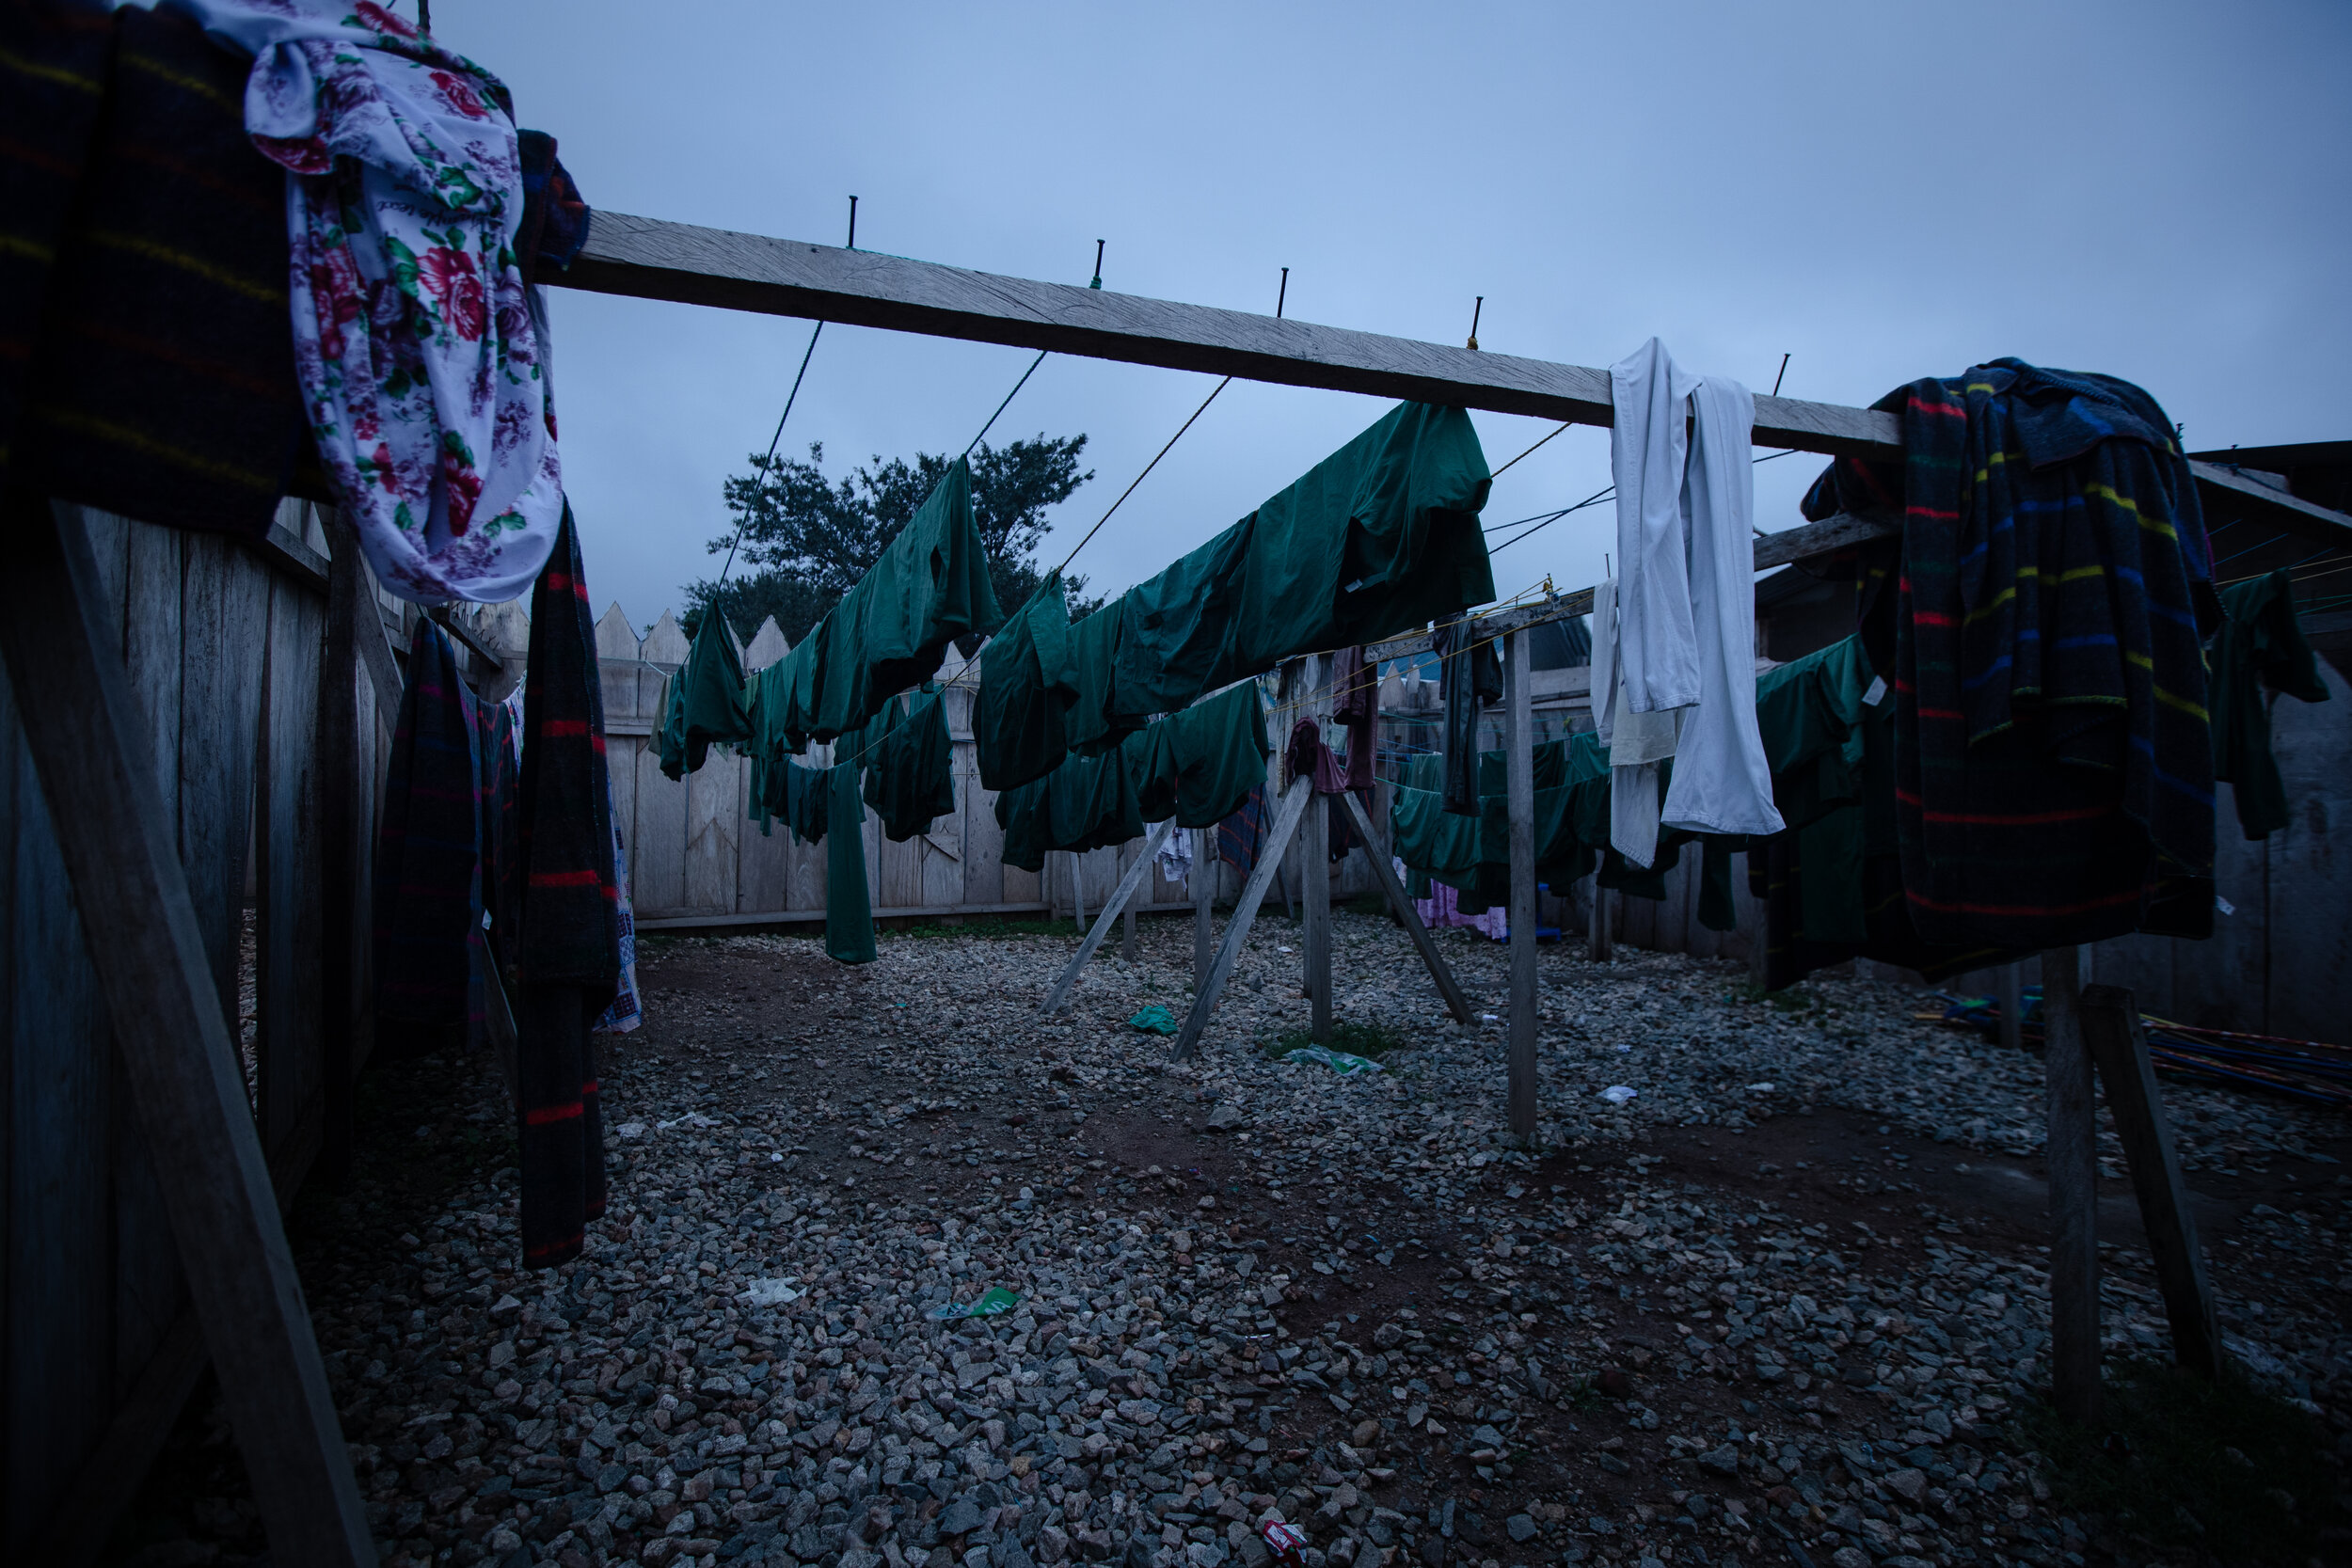  the medics’ washed clothes at dusk, after a long day at Beni Ebola treatment center, The Democratic Republic of Congo, 2019 